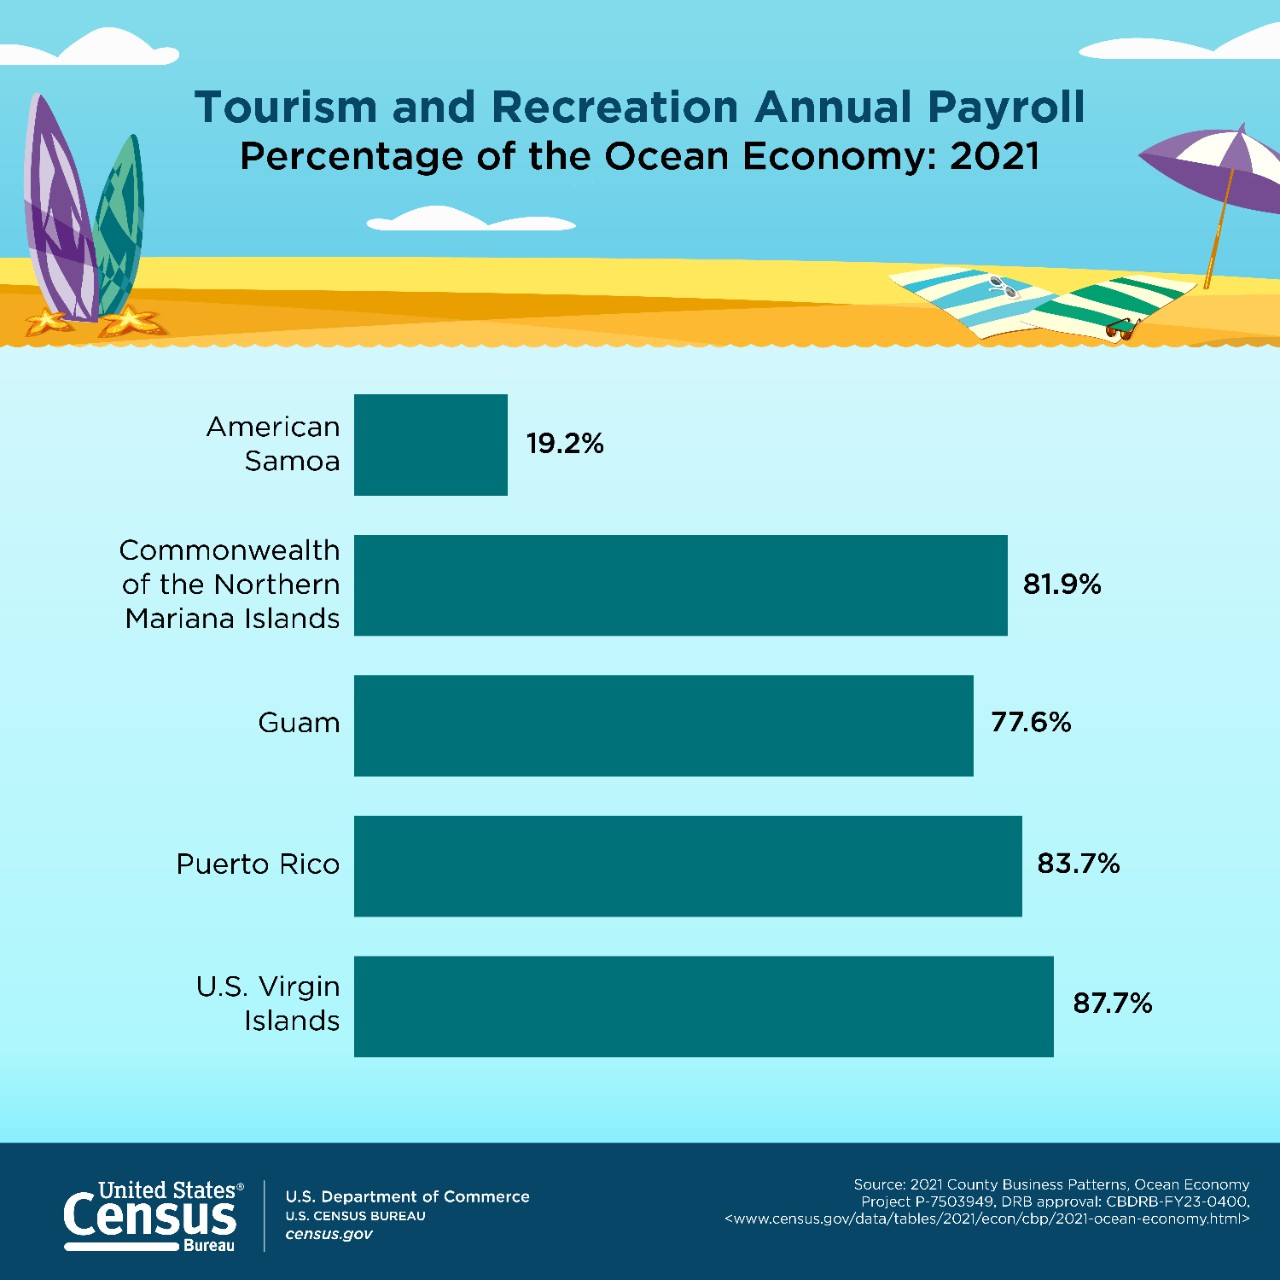 Tourism and Recreation Annual Payroll Percentage of the Ocean Economy: 2021